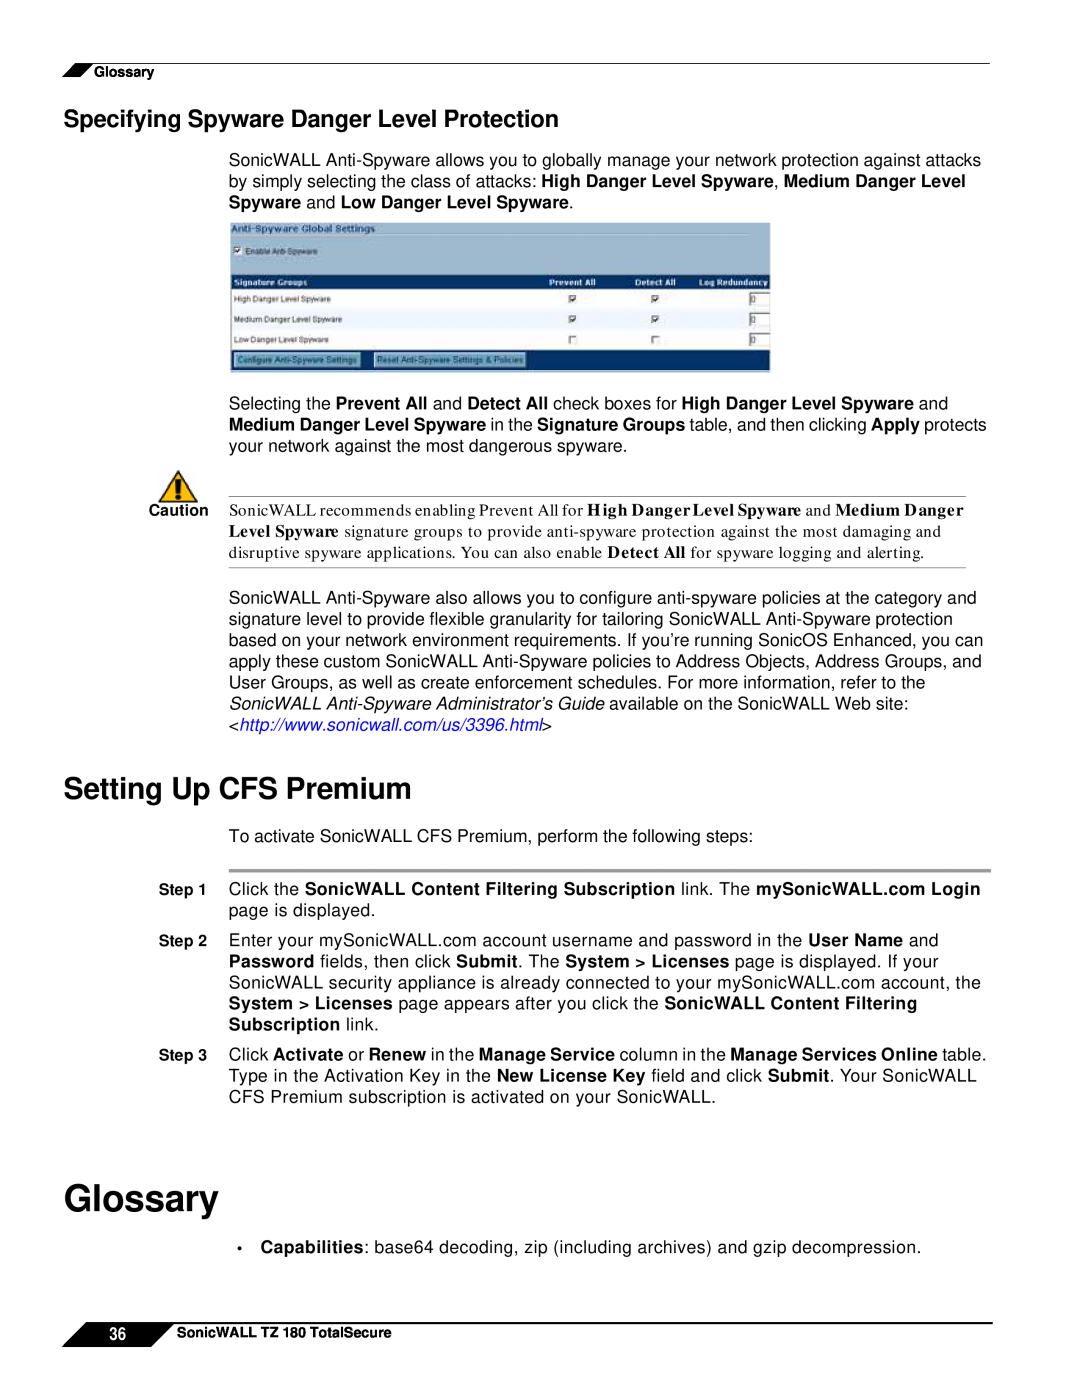 SonicWALL TZ 180 manual Glossary, Setting Up CFS Premium, Specifying Spyware Danger Level Protection 